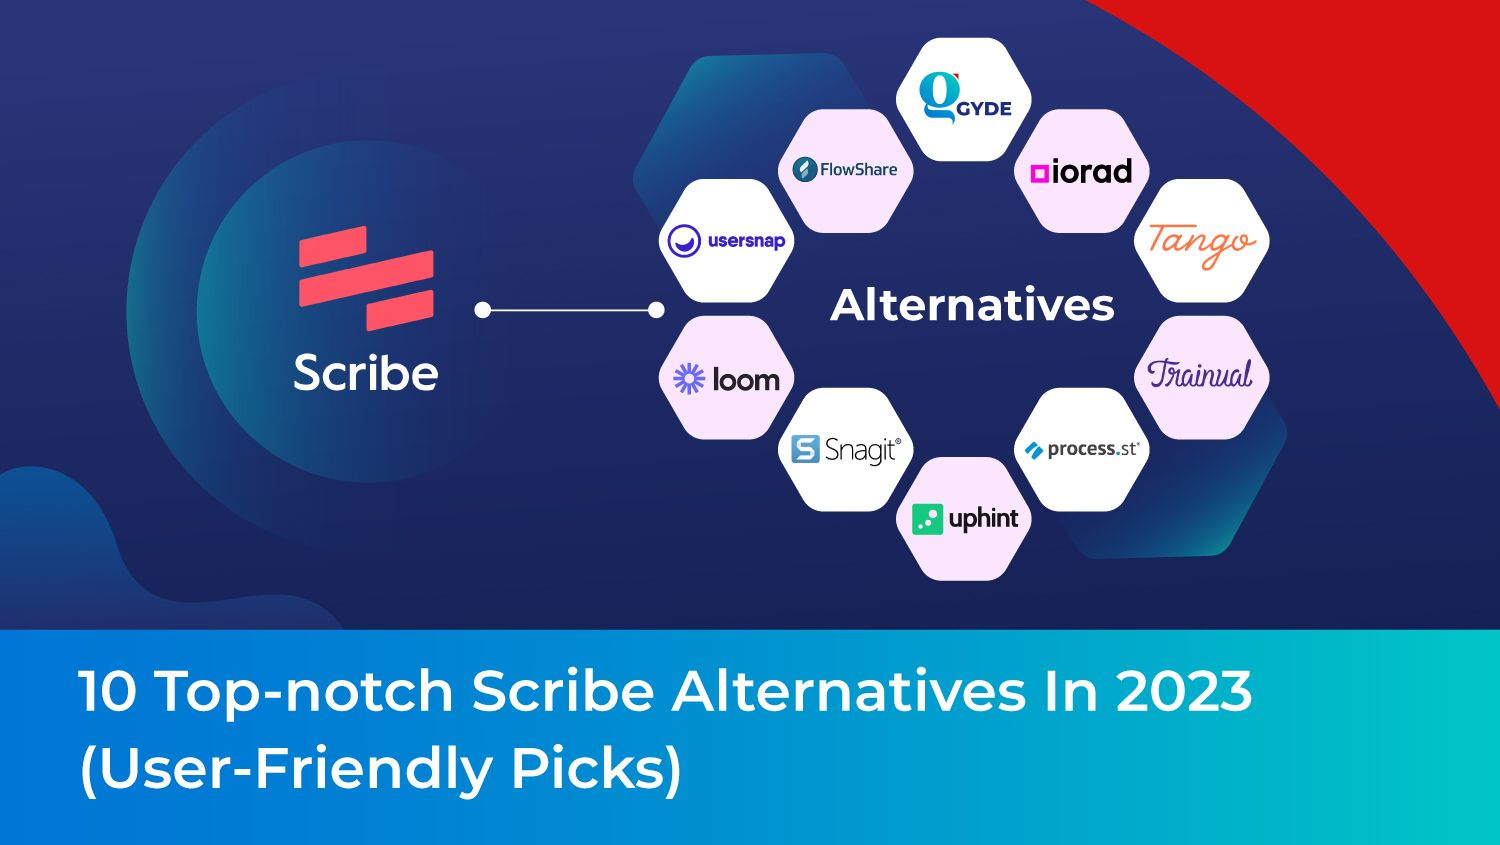 What is the best Scribe (scribehow.com) alternative?